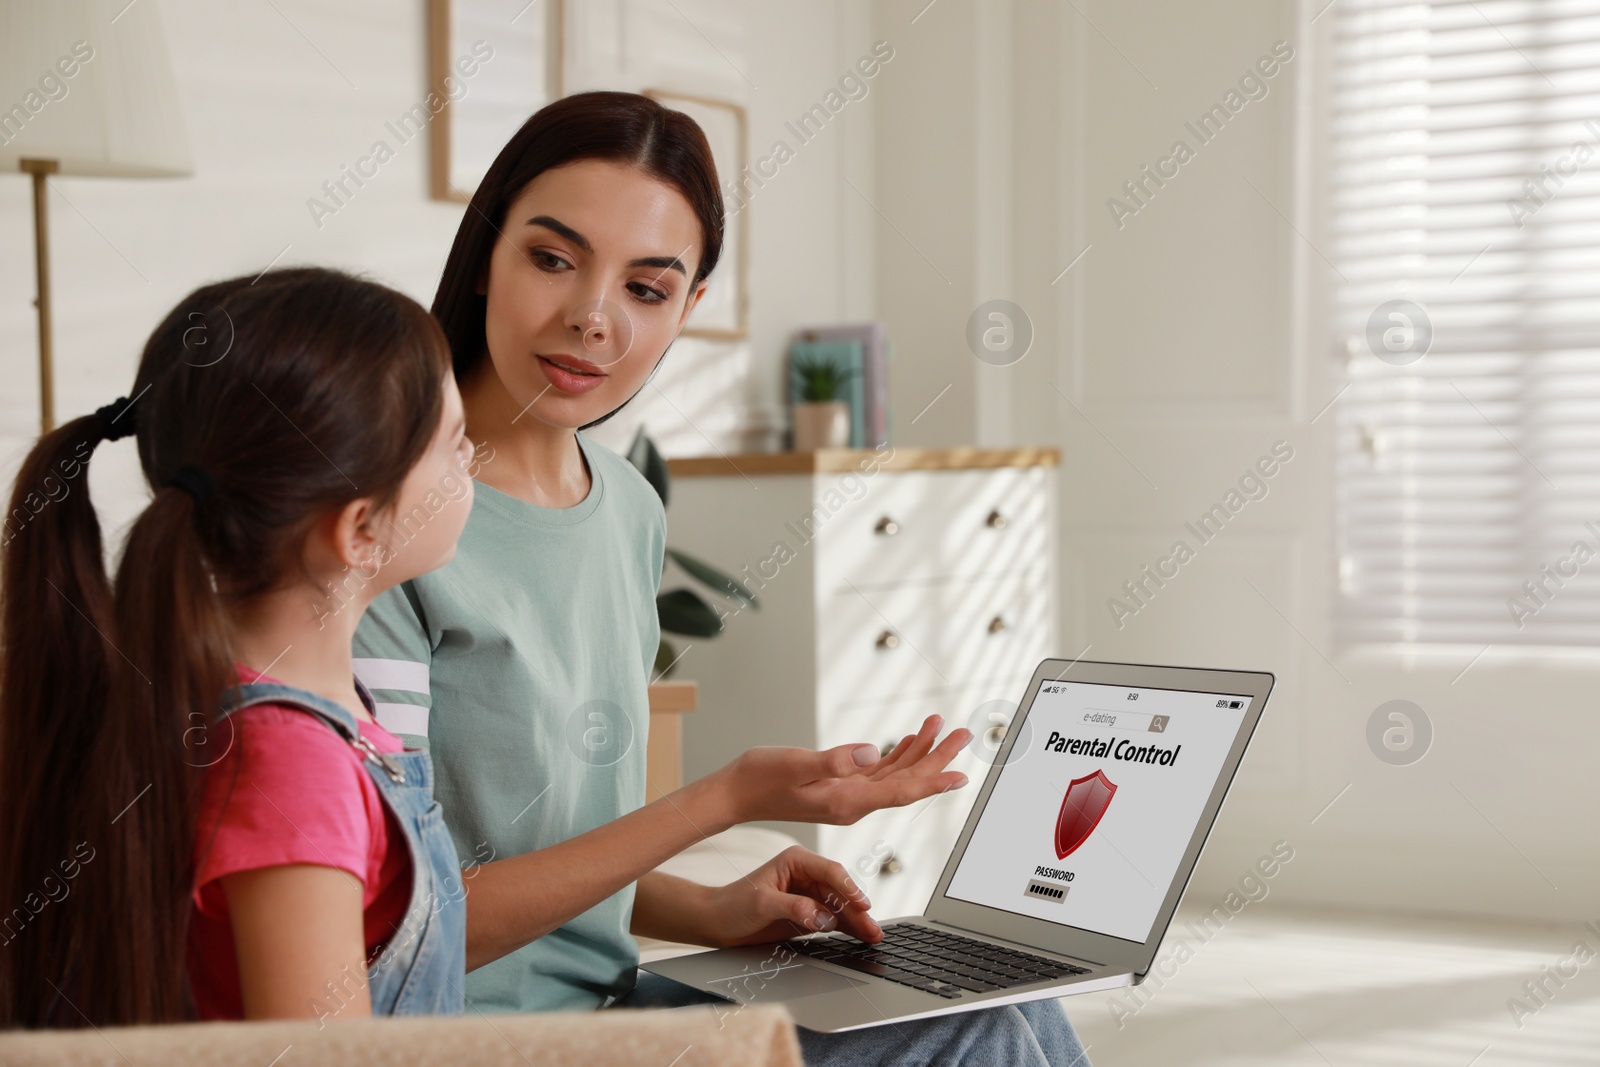 Photo of Mother installing parental control app on laptop to ensure her child's safety at home